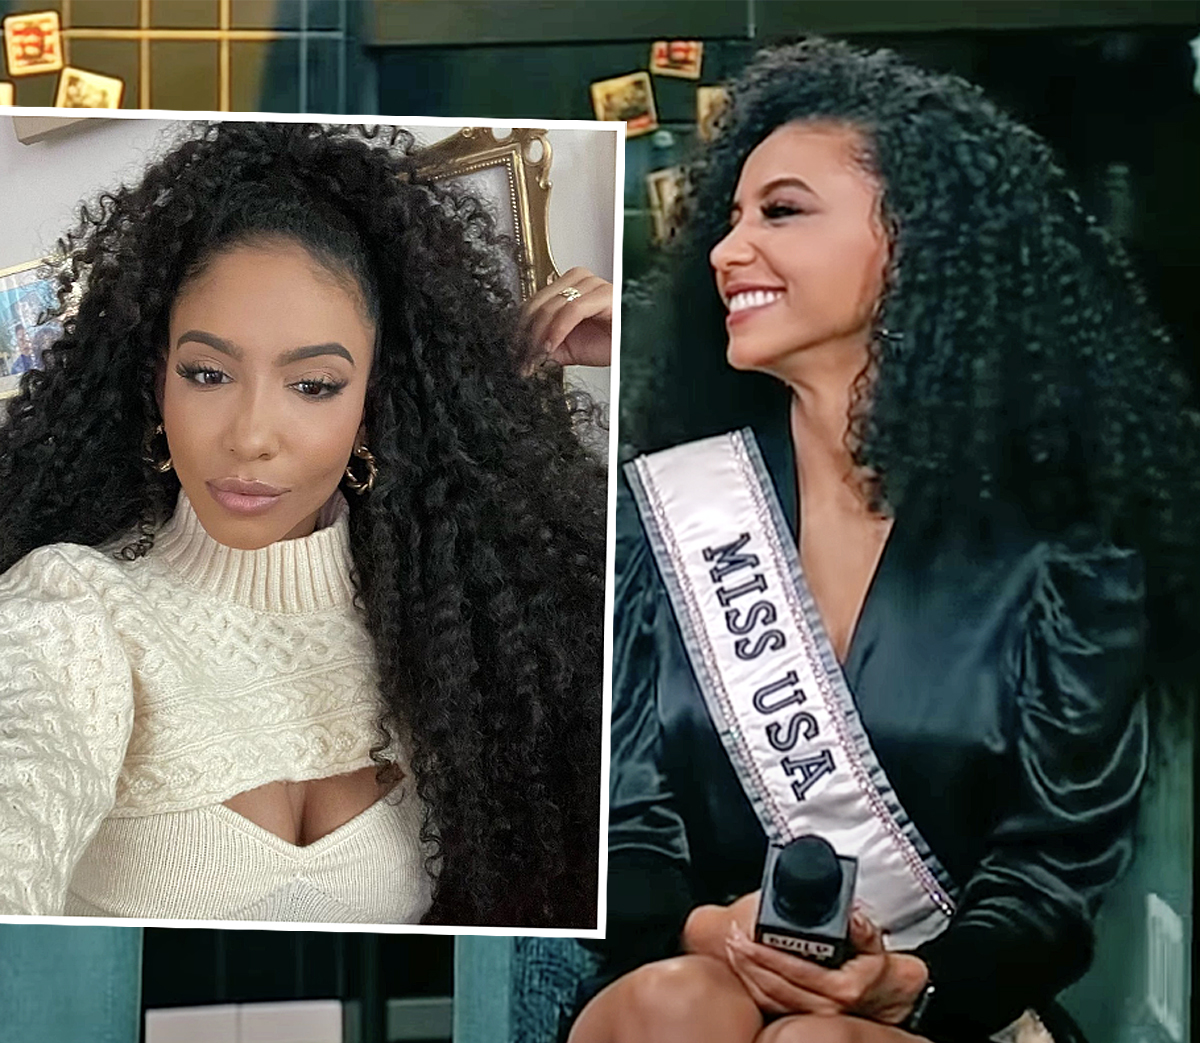 Miss USA 2019 Cheslie Kryst Dead At 30